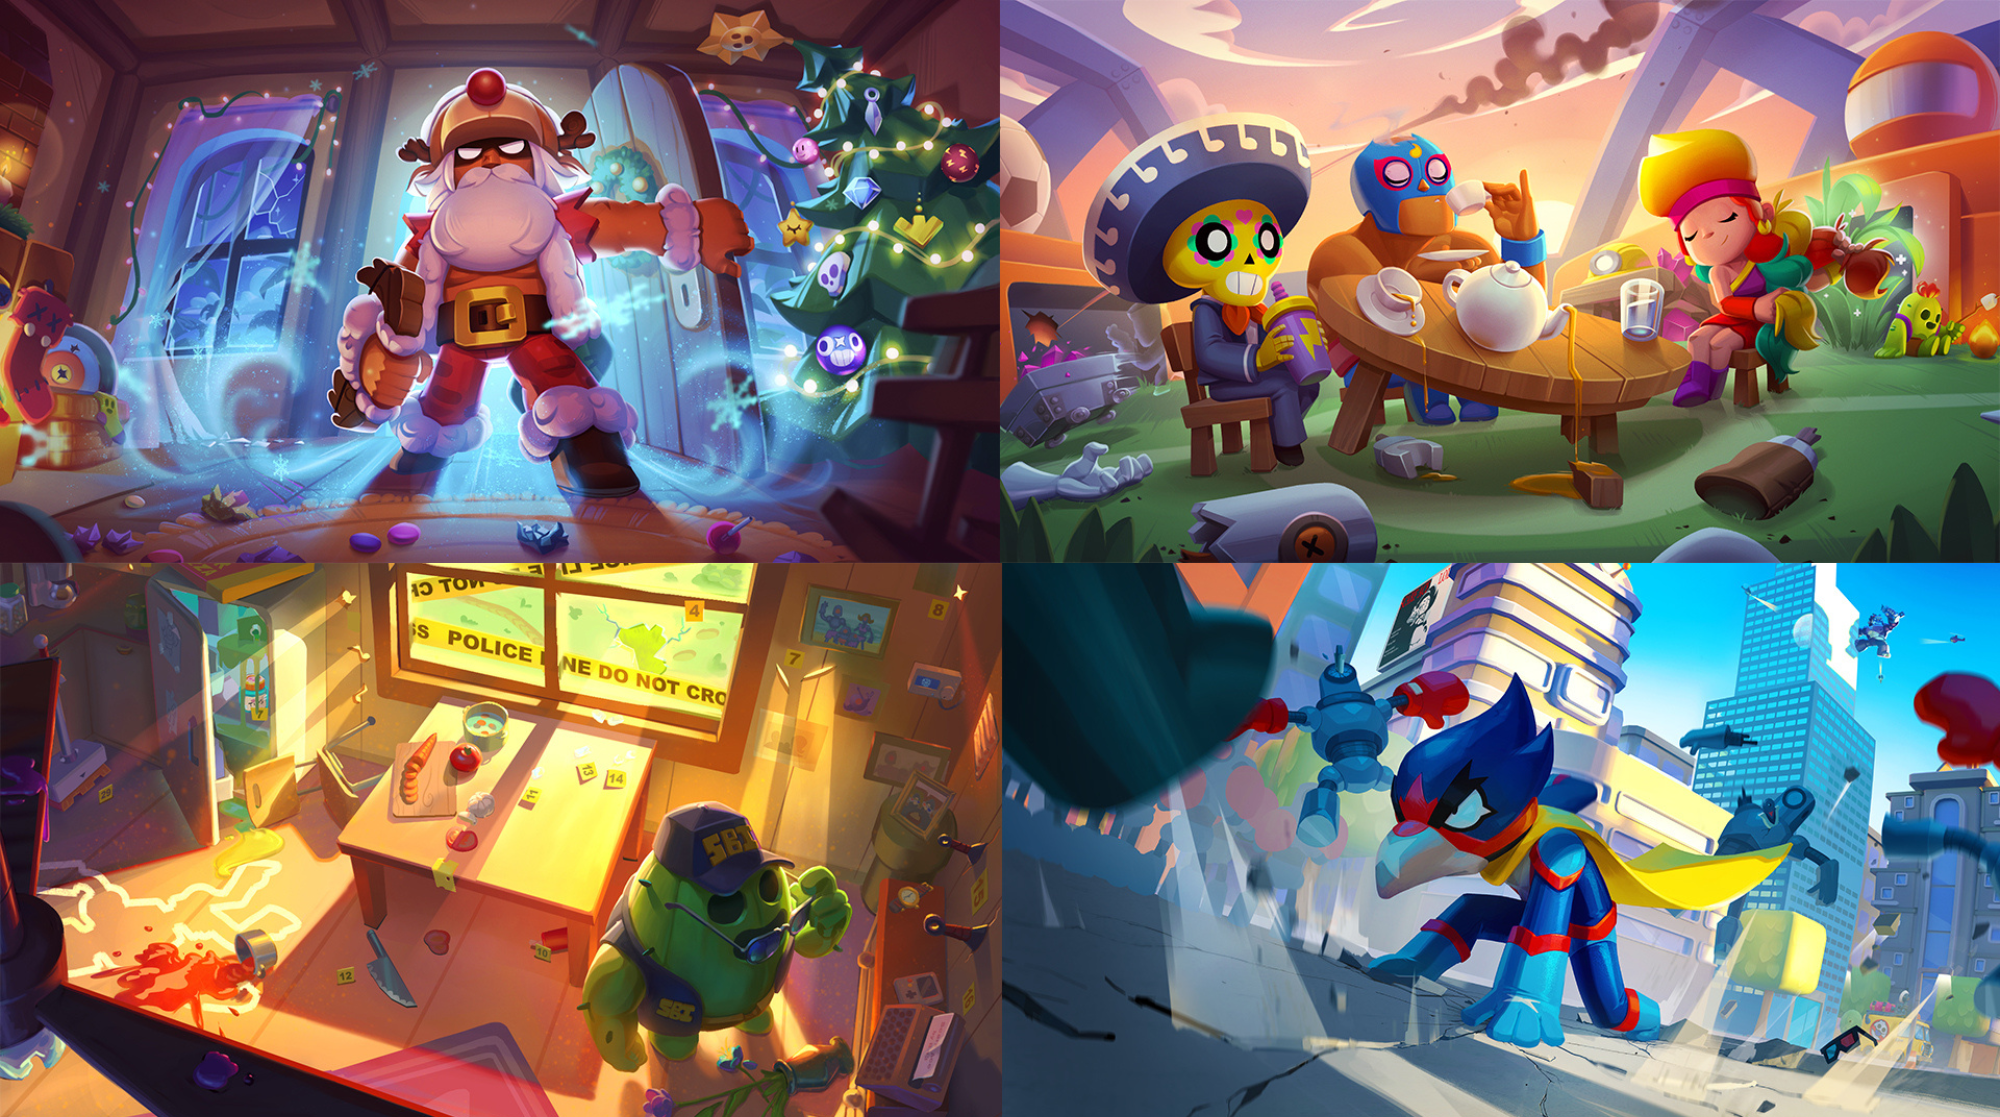 194 Brawl Stars Royalty-Free Images, Stock Photos & Pictures